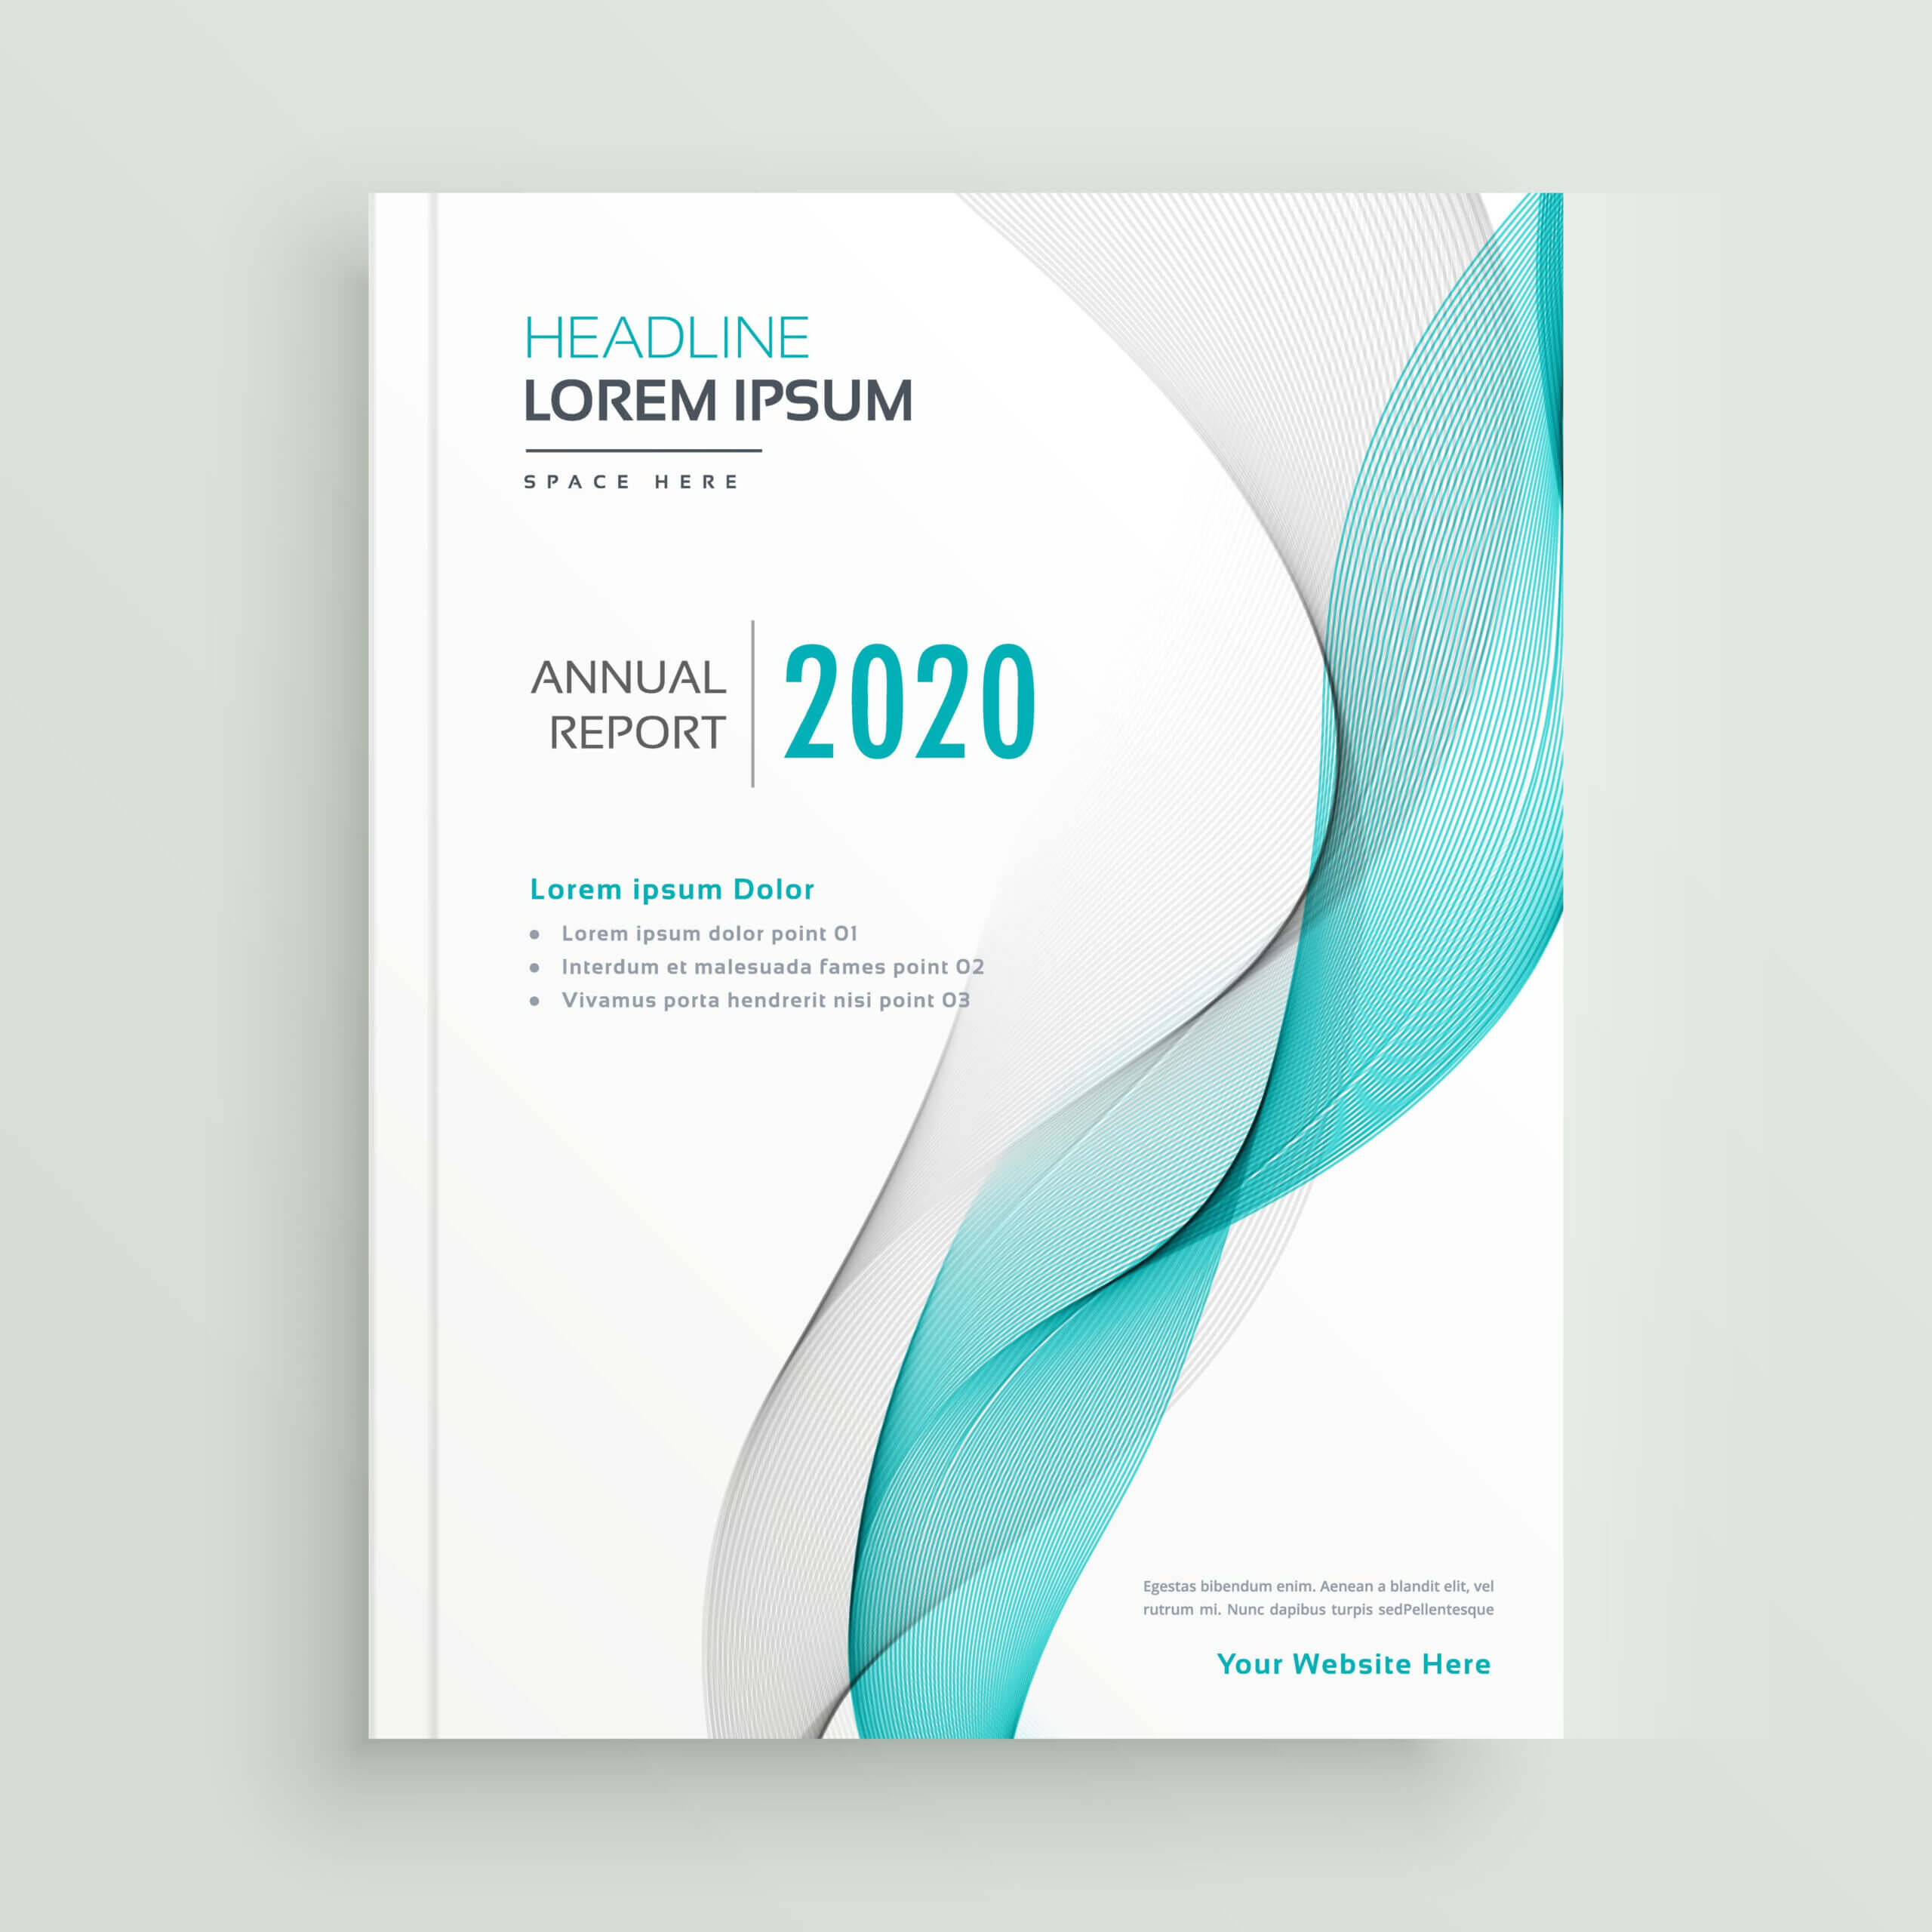 Professional Business Brochure Or Book Cover Design Template For Cover Page For Annual Report Template